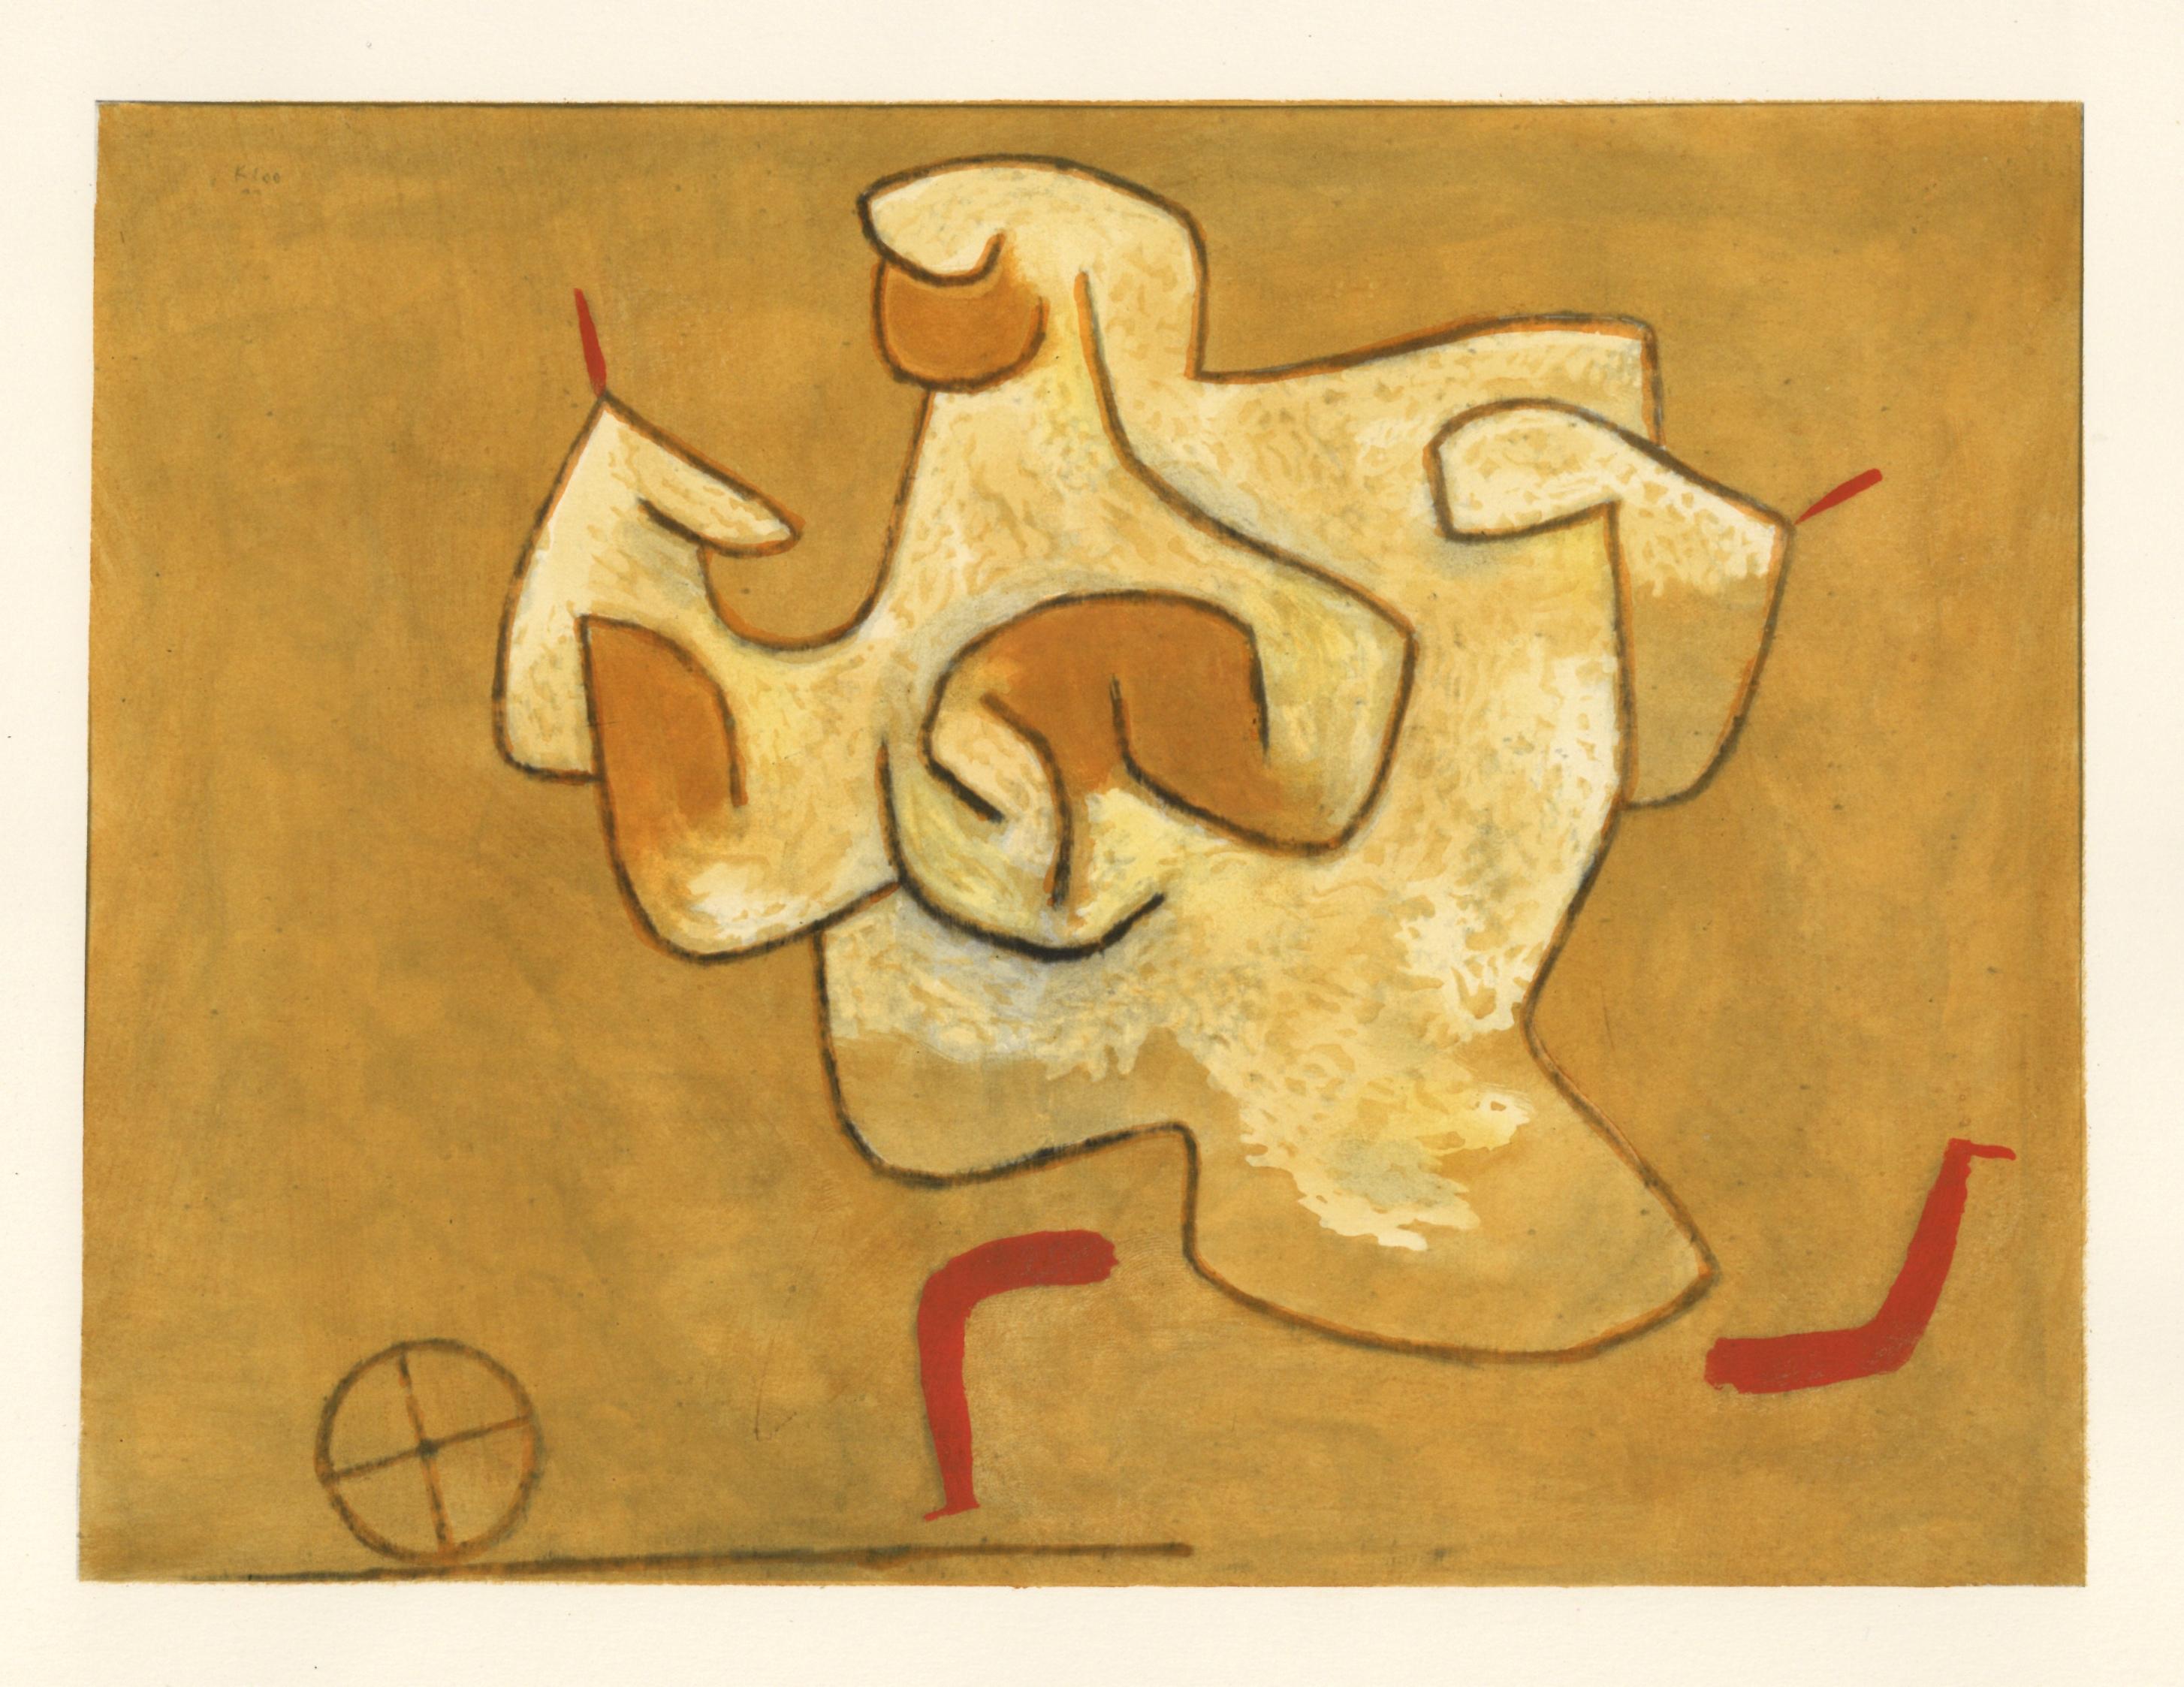 "Fame" pochoir - Print by (after) Paul Klee